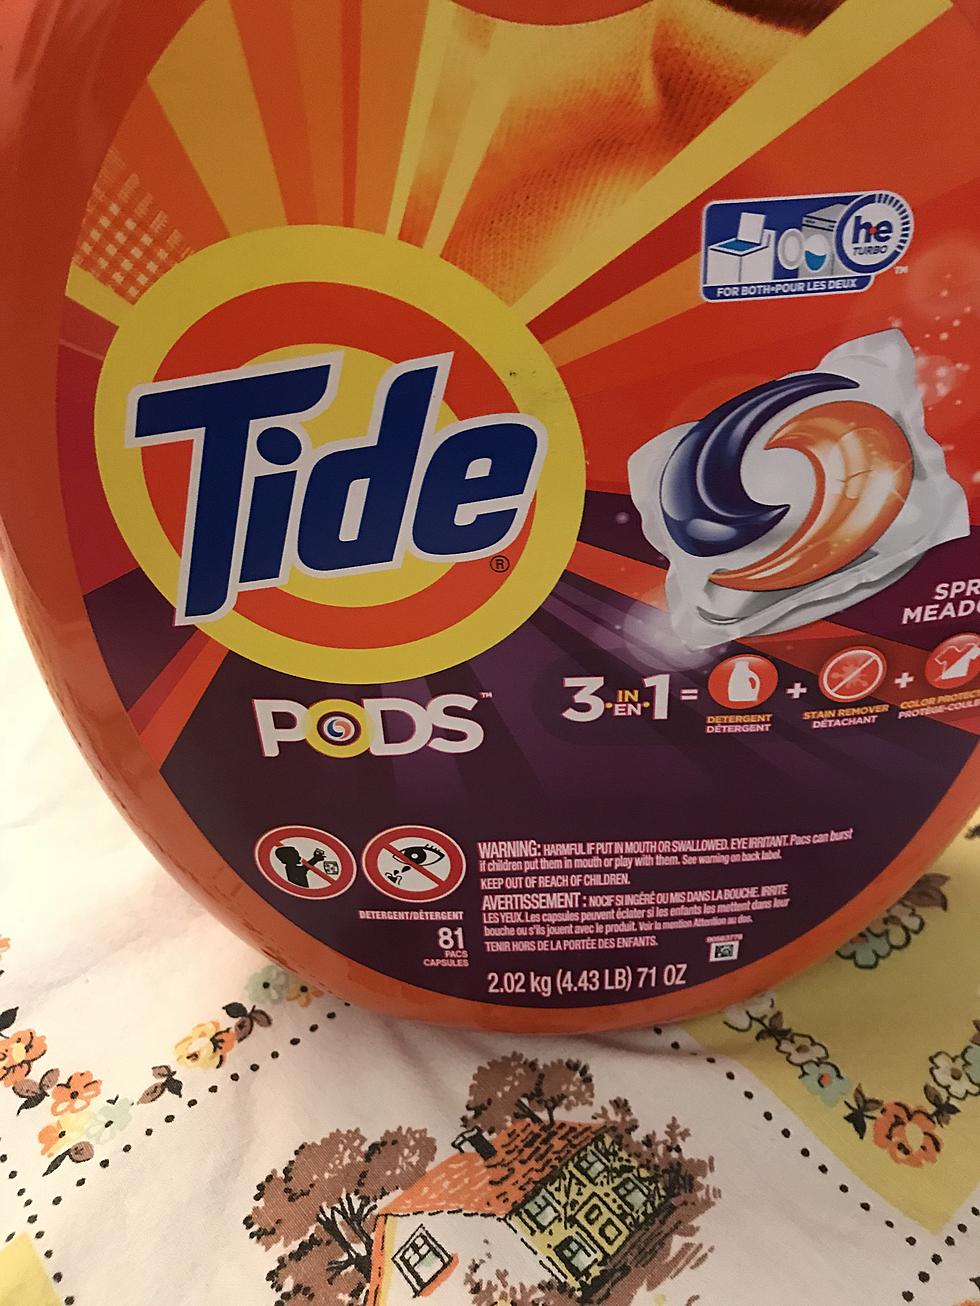 Bogus Tweet About Tide Pods Wrong